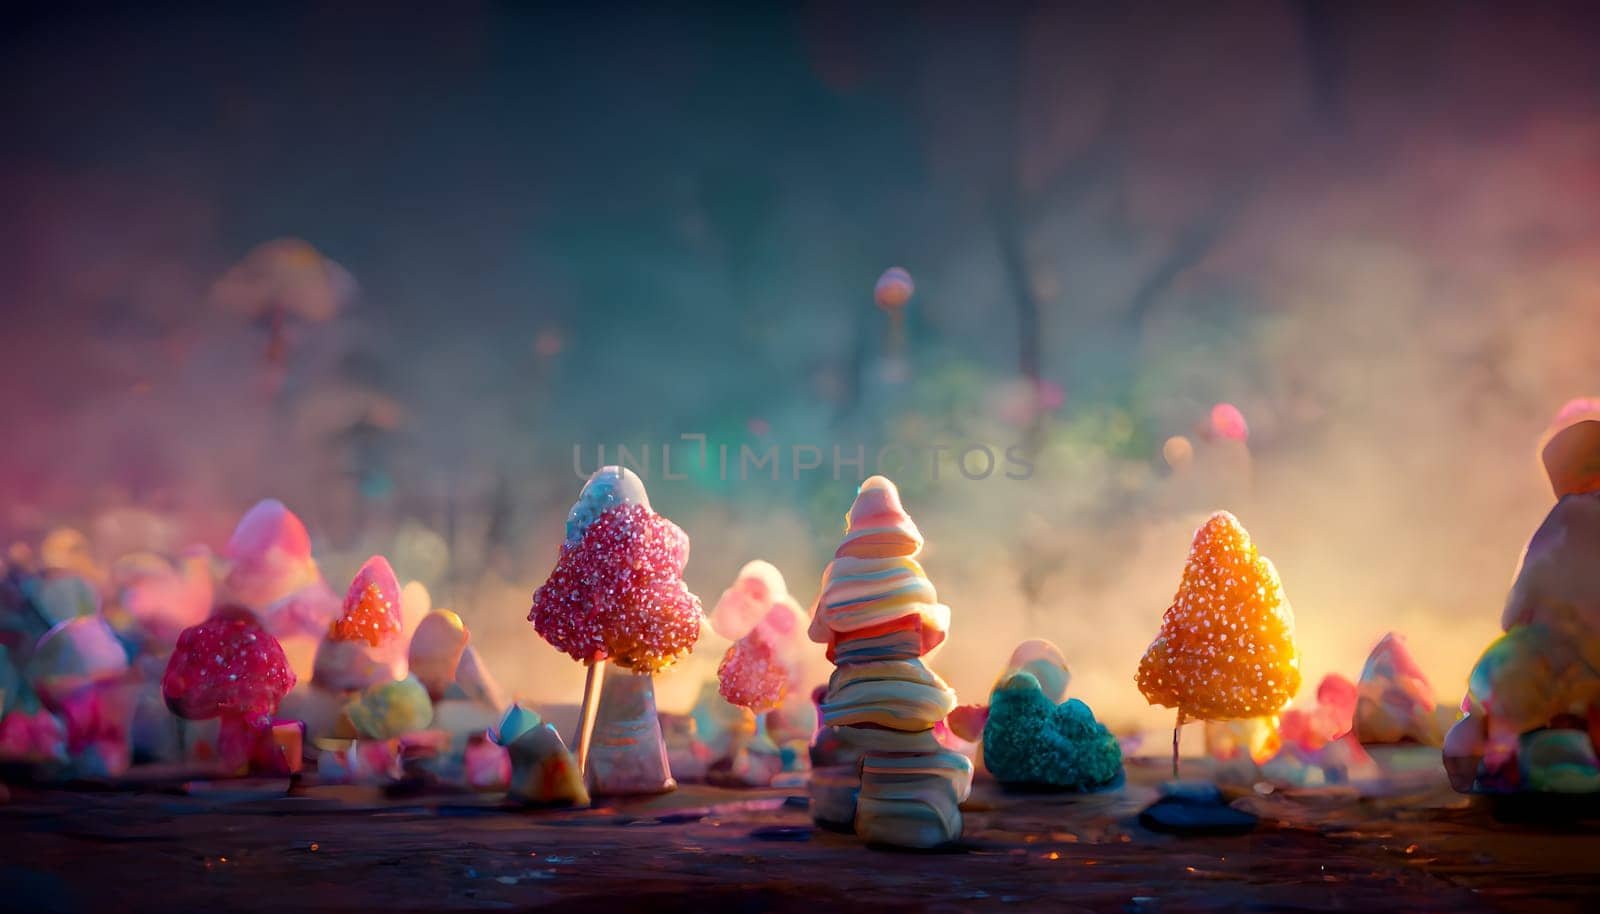 fantasy marshmallow forest, neural network generated art. Digitally generated image. Not based on any actual scene or pattern.